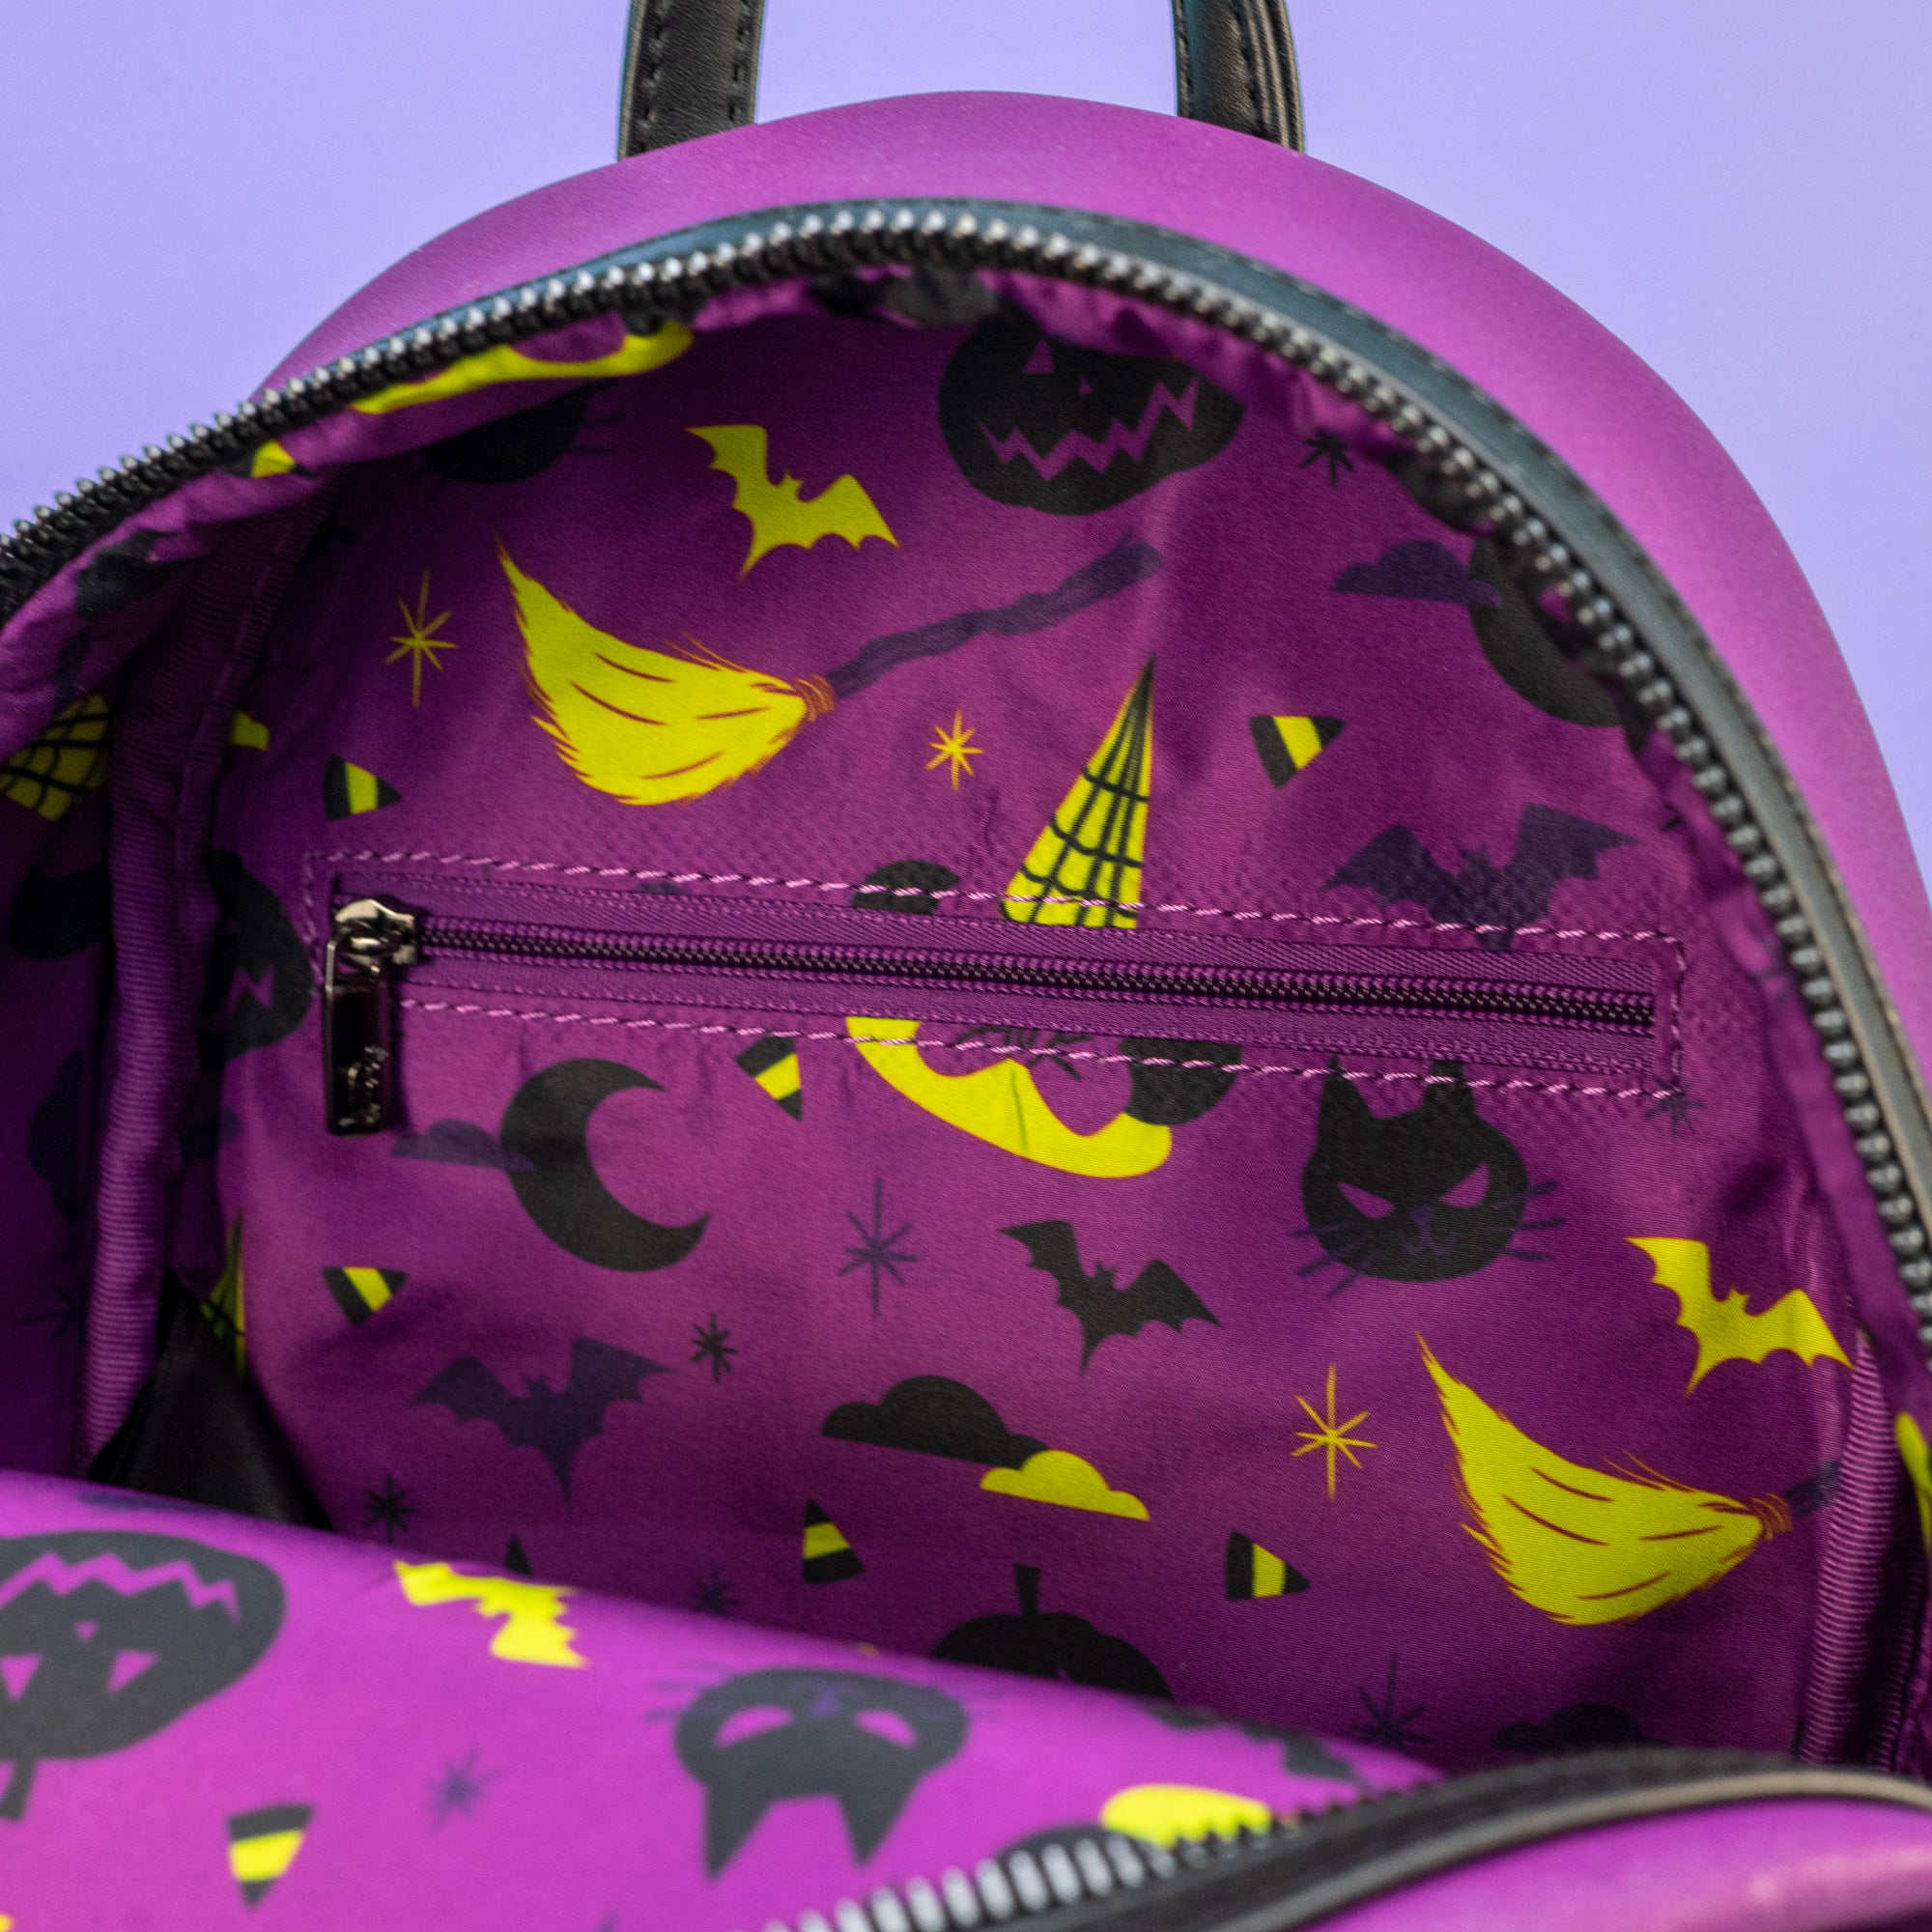 Loungefly x Disney Witch Minnie Mouse Cosplay Mini Backpack